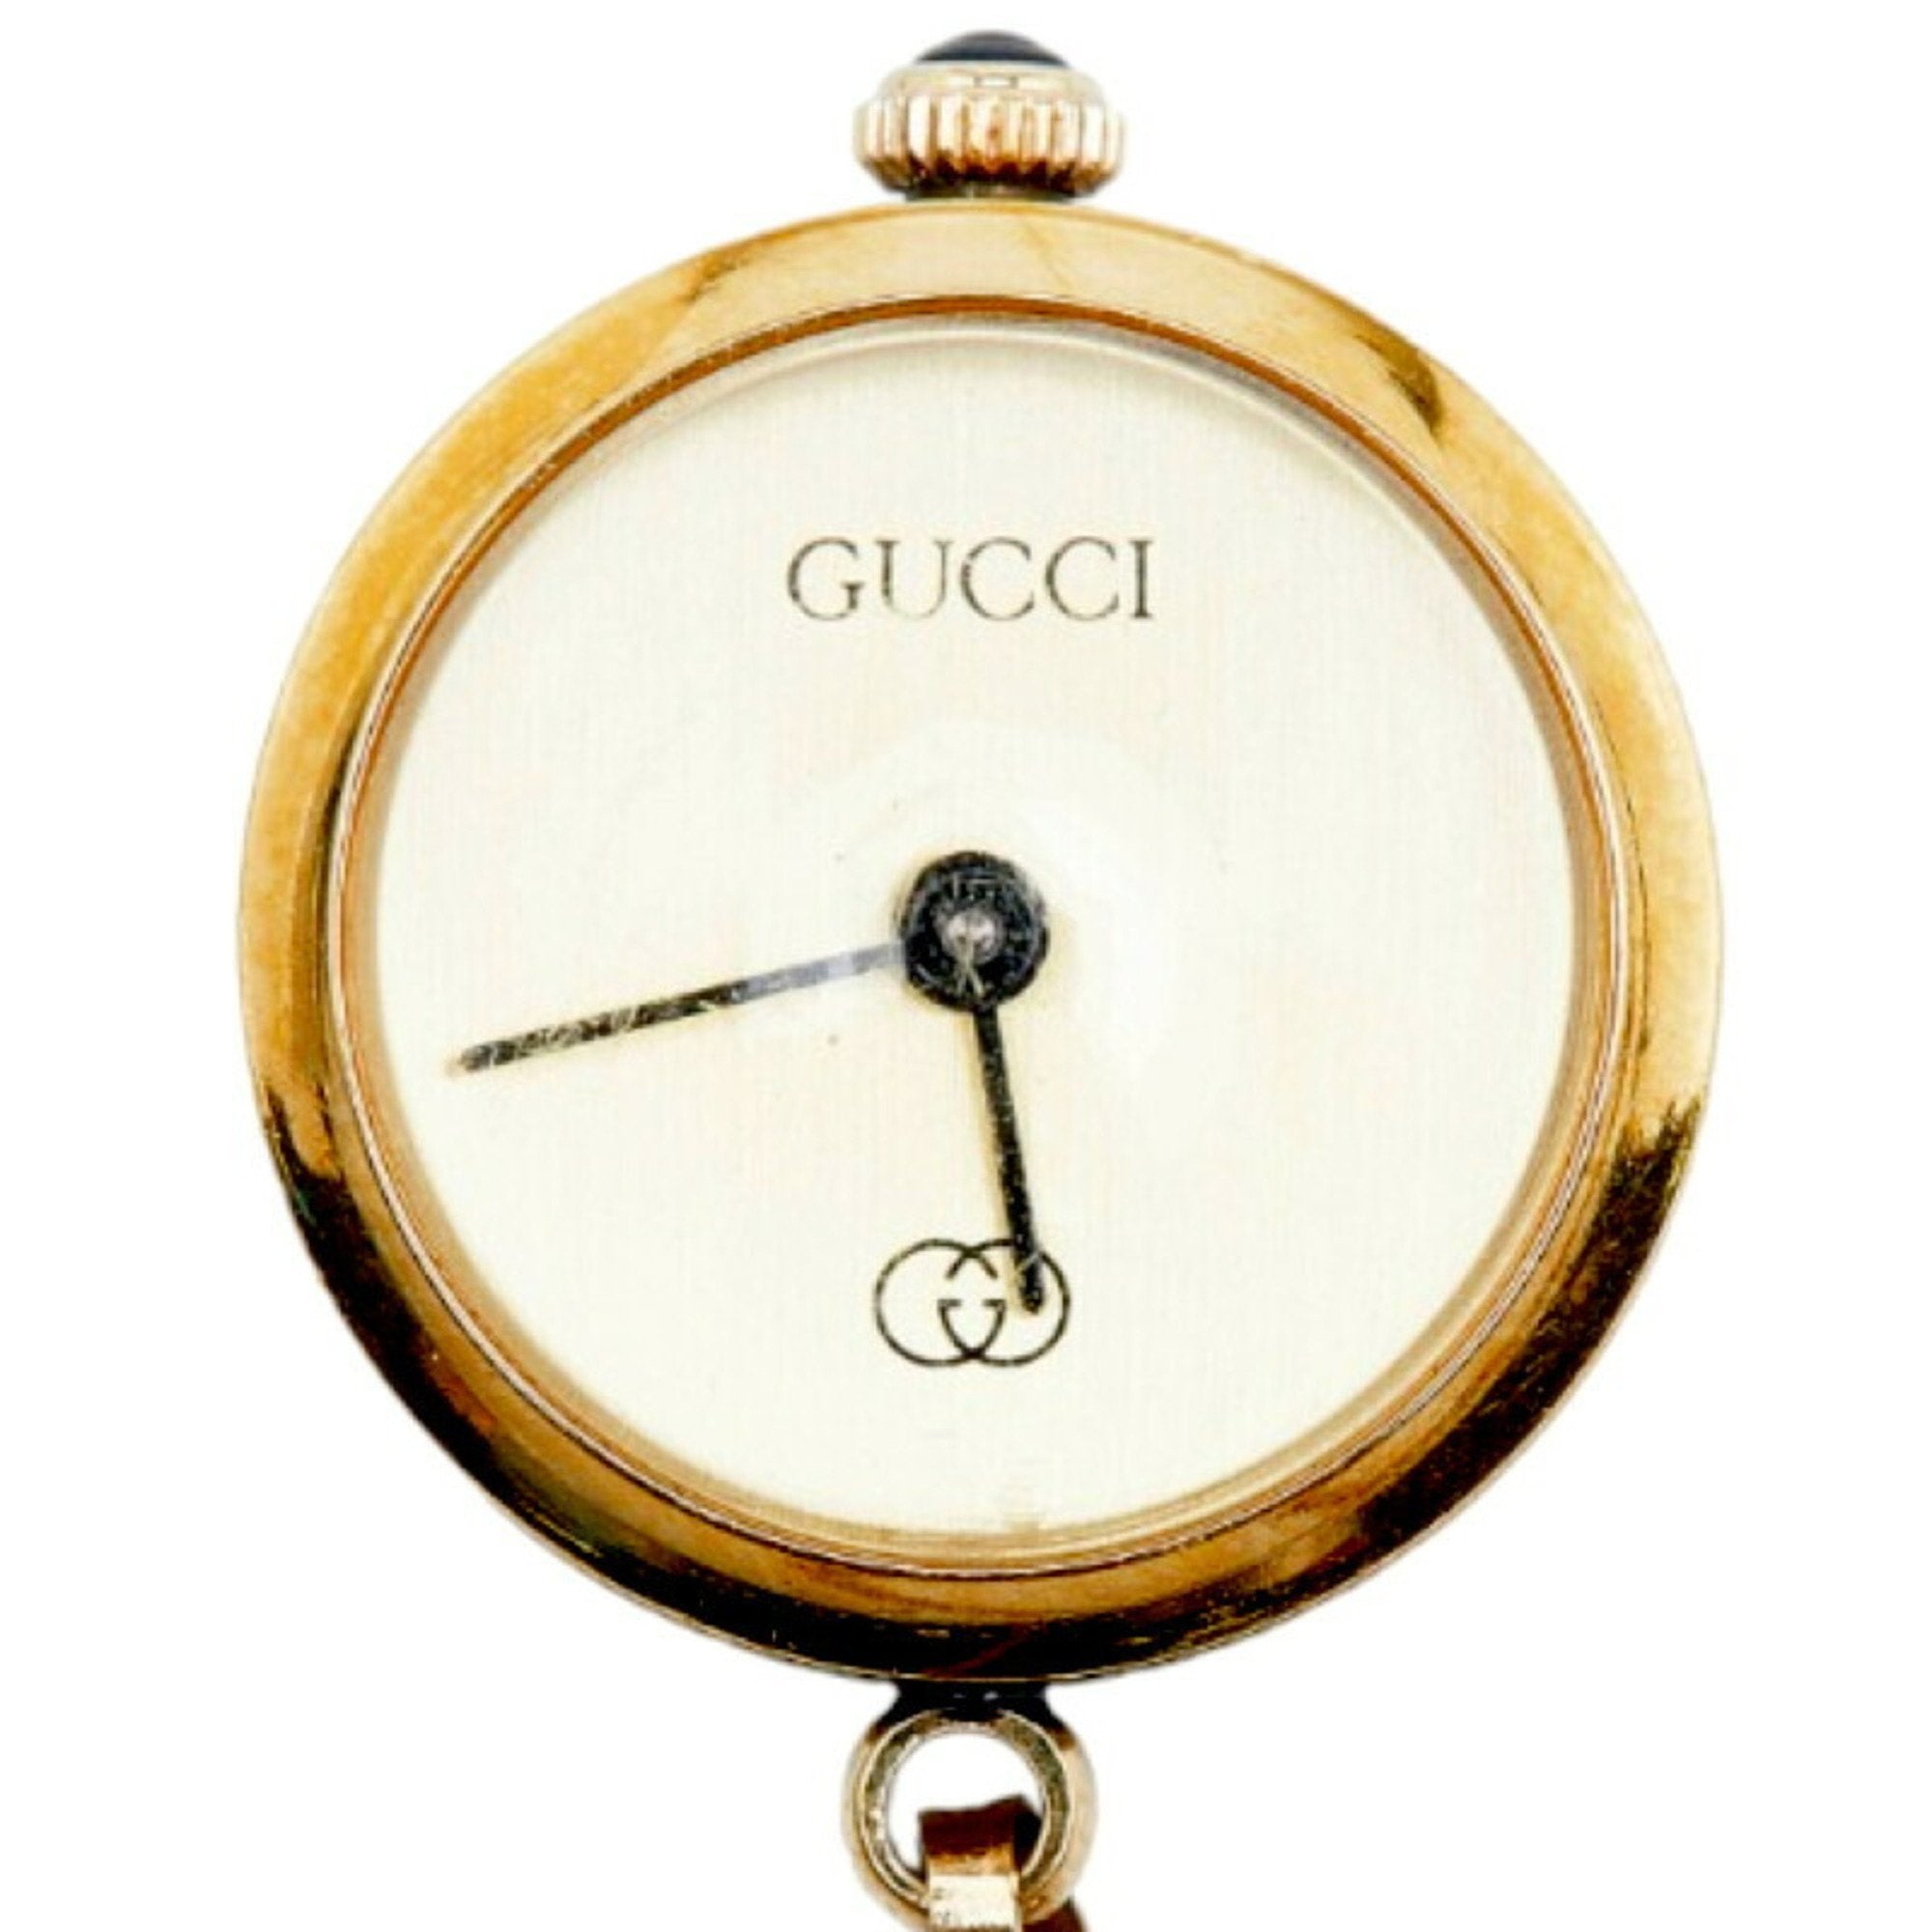 Vintage Gucci 2700 Cable Bangle Watch Black Dial Gold Tone Good Preowned  Condition - Etsy Hong Kong